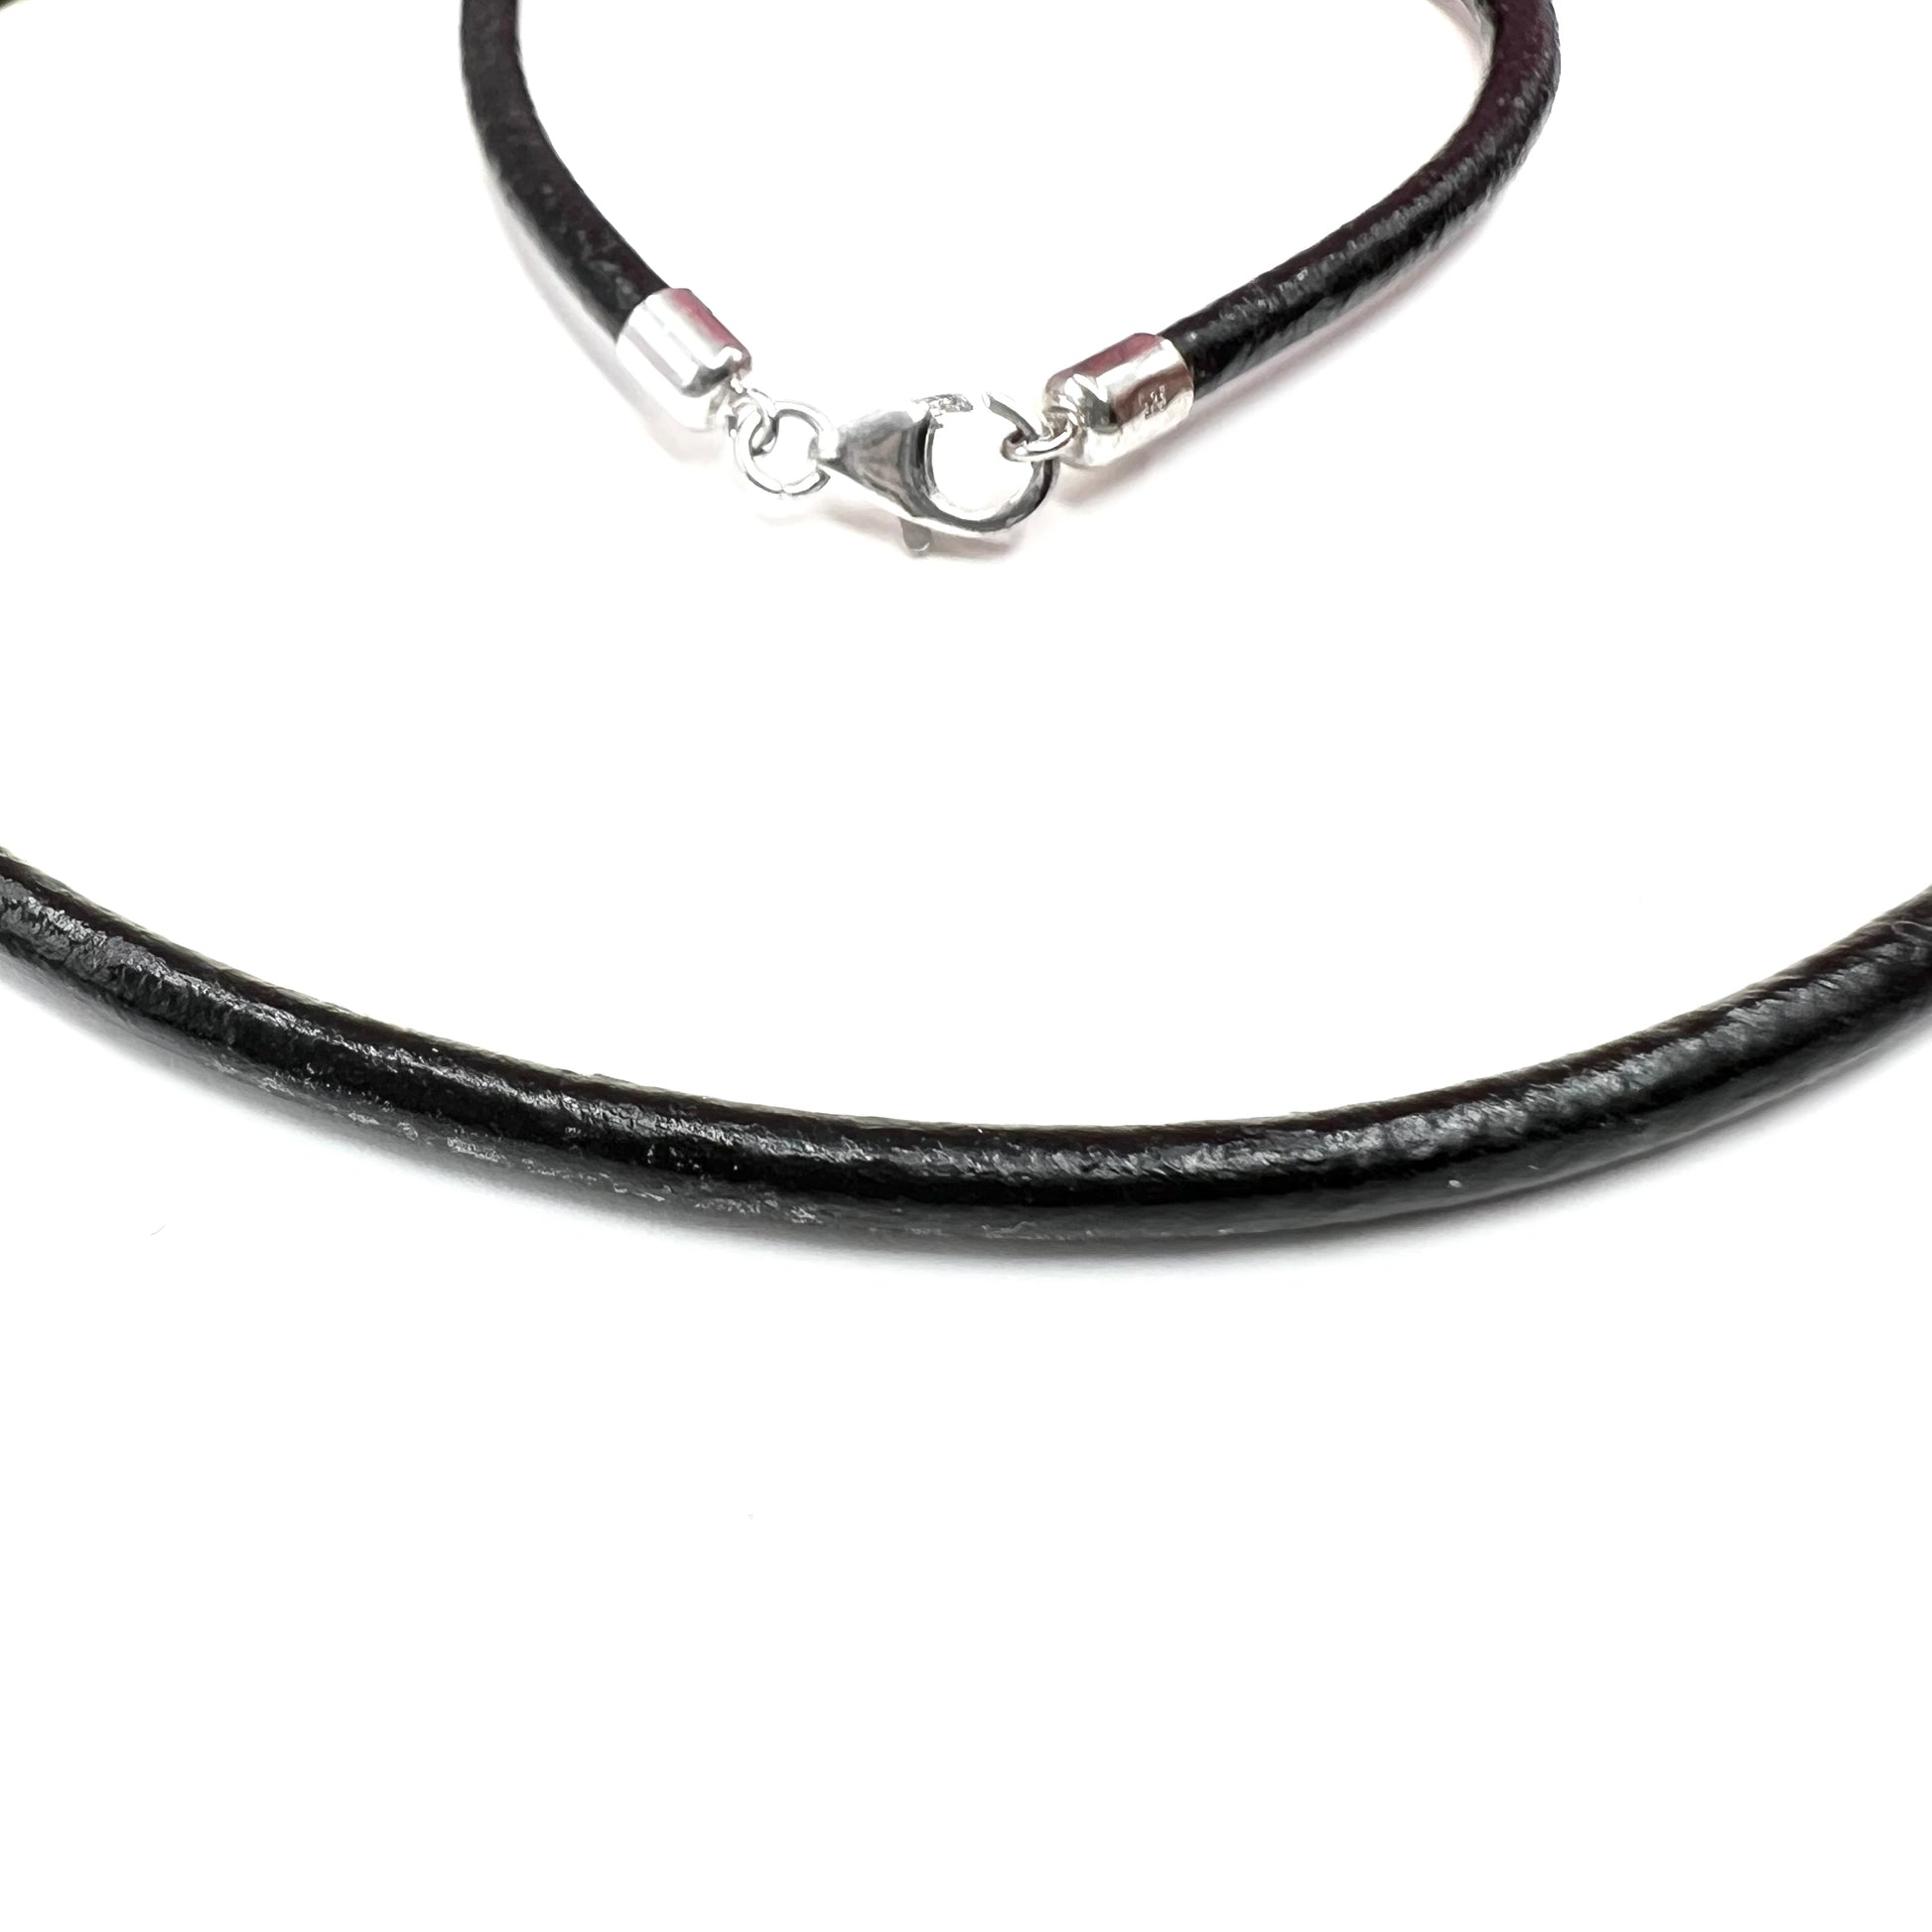  Black Leather Cord, Silver Finish ends with lobster clasp